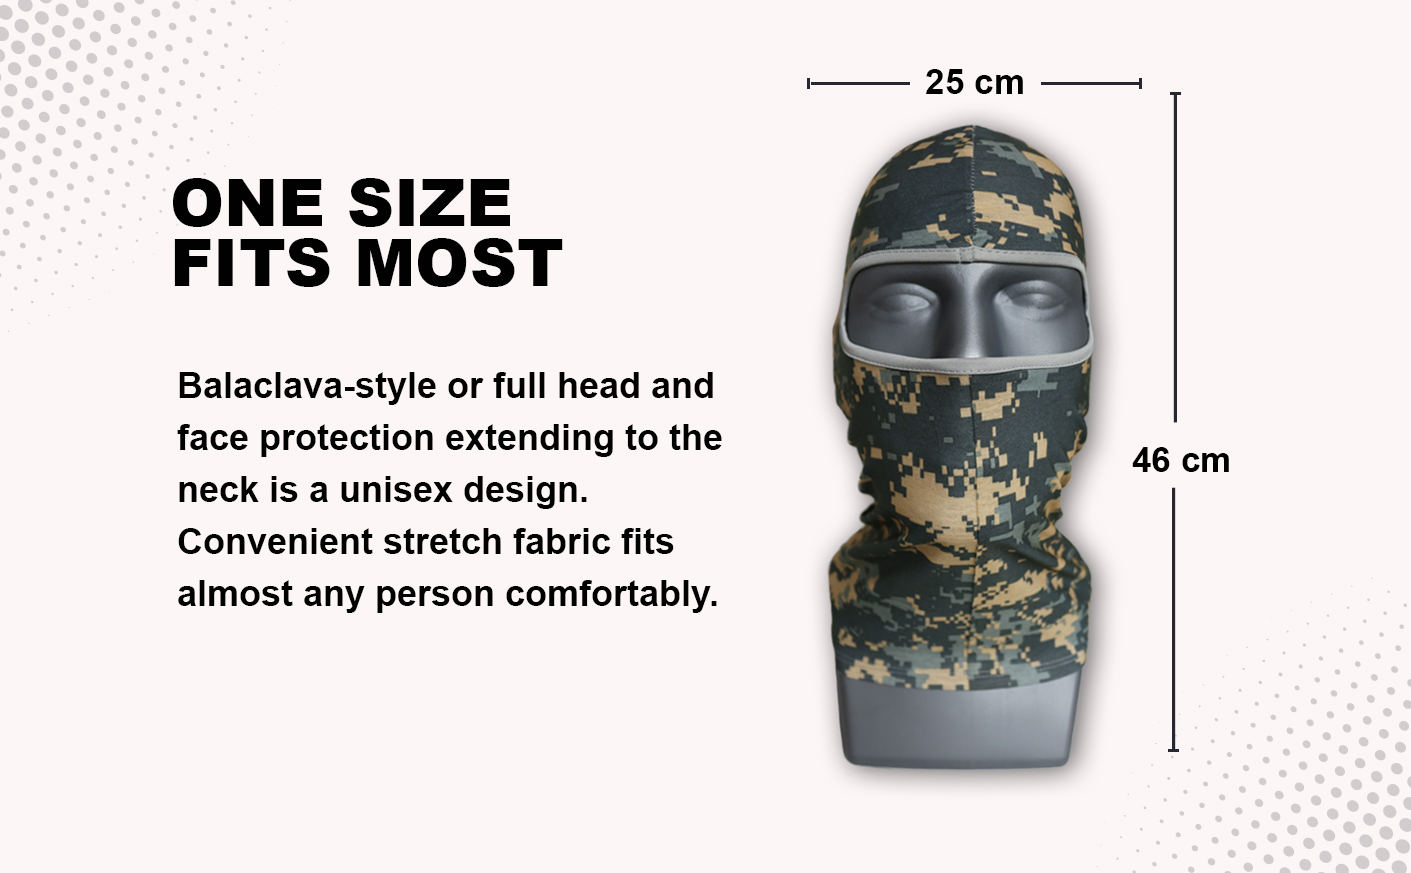 WOLF Sun Protection Breathable Balaclava Full-Face Mask Hood Neck Gaiter Quick One Safety